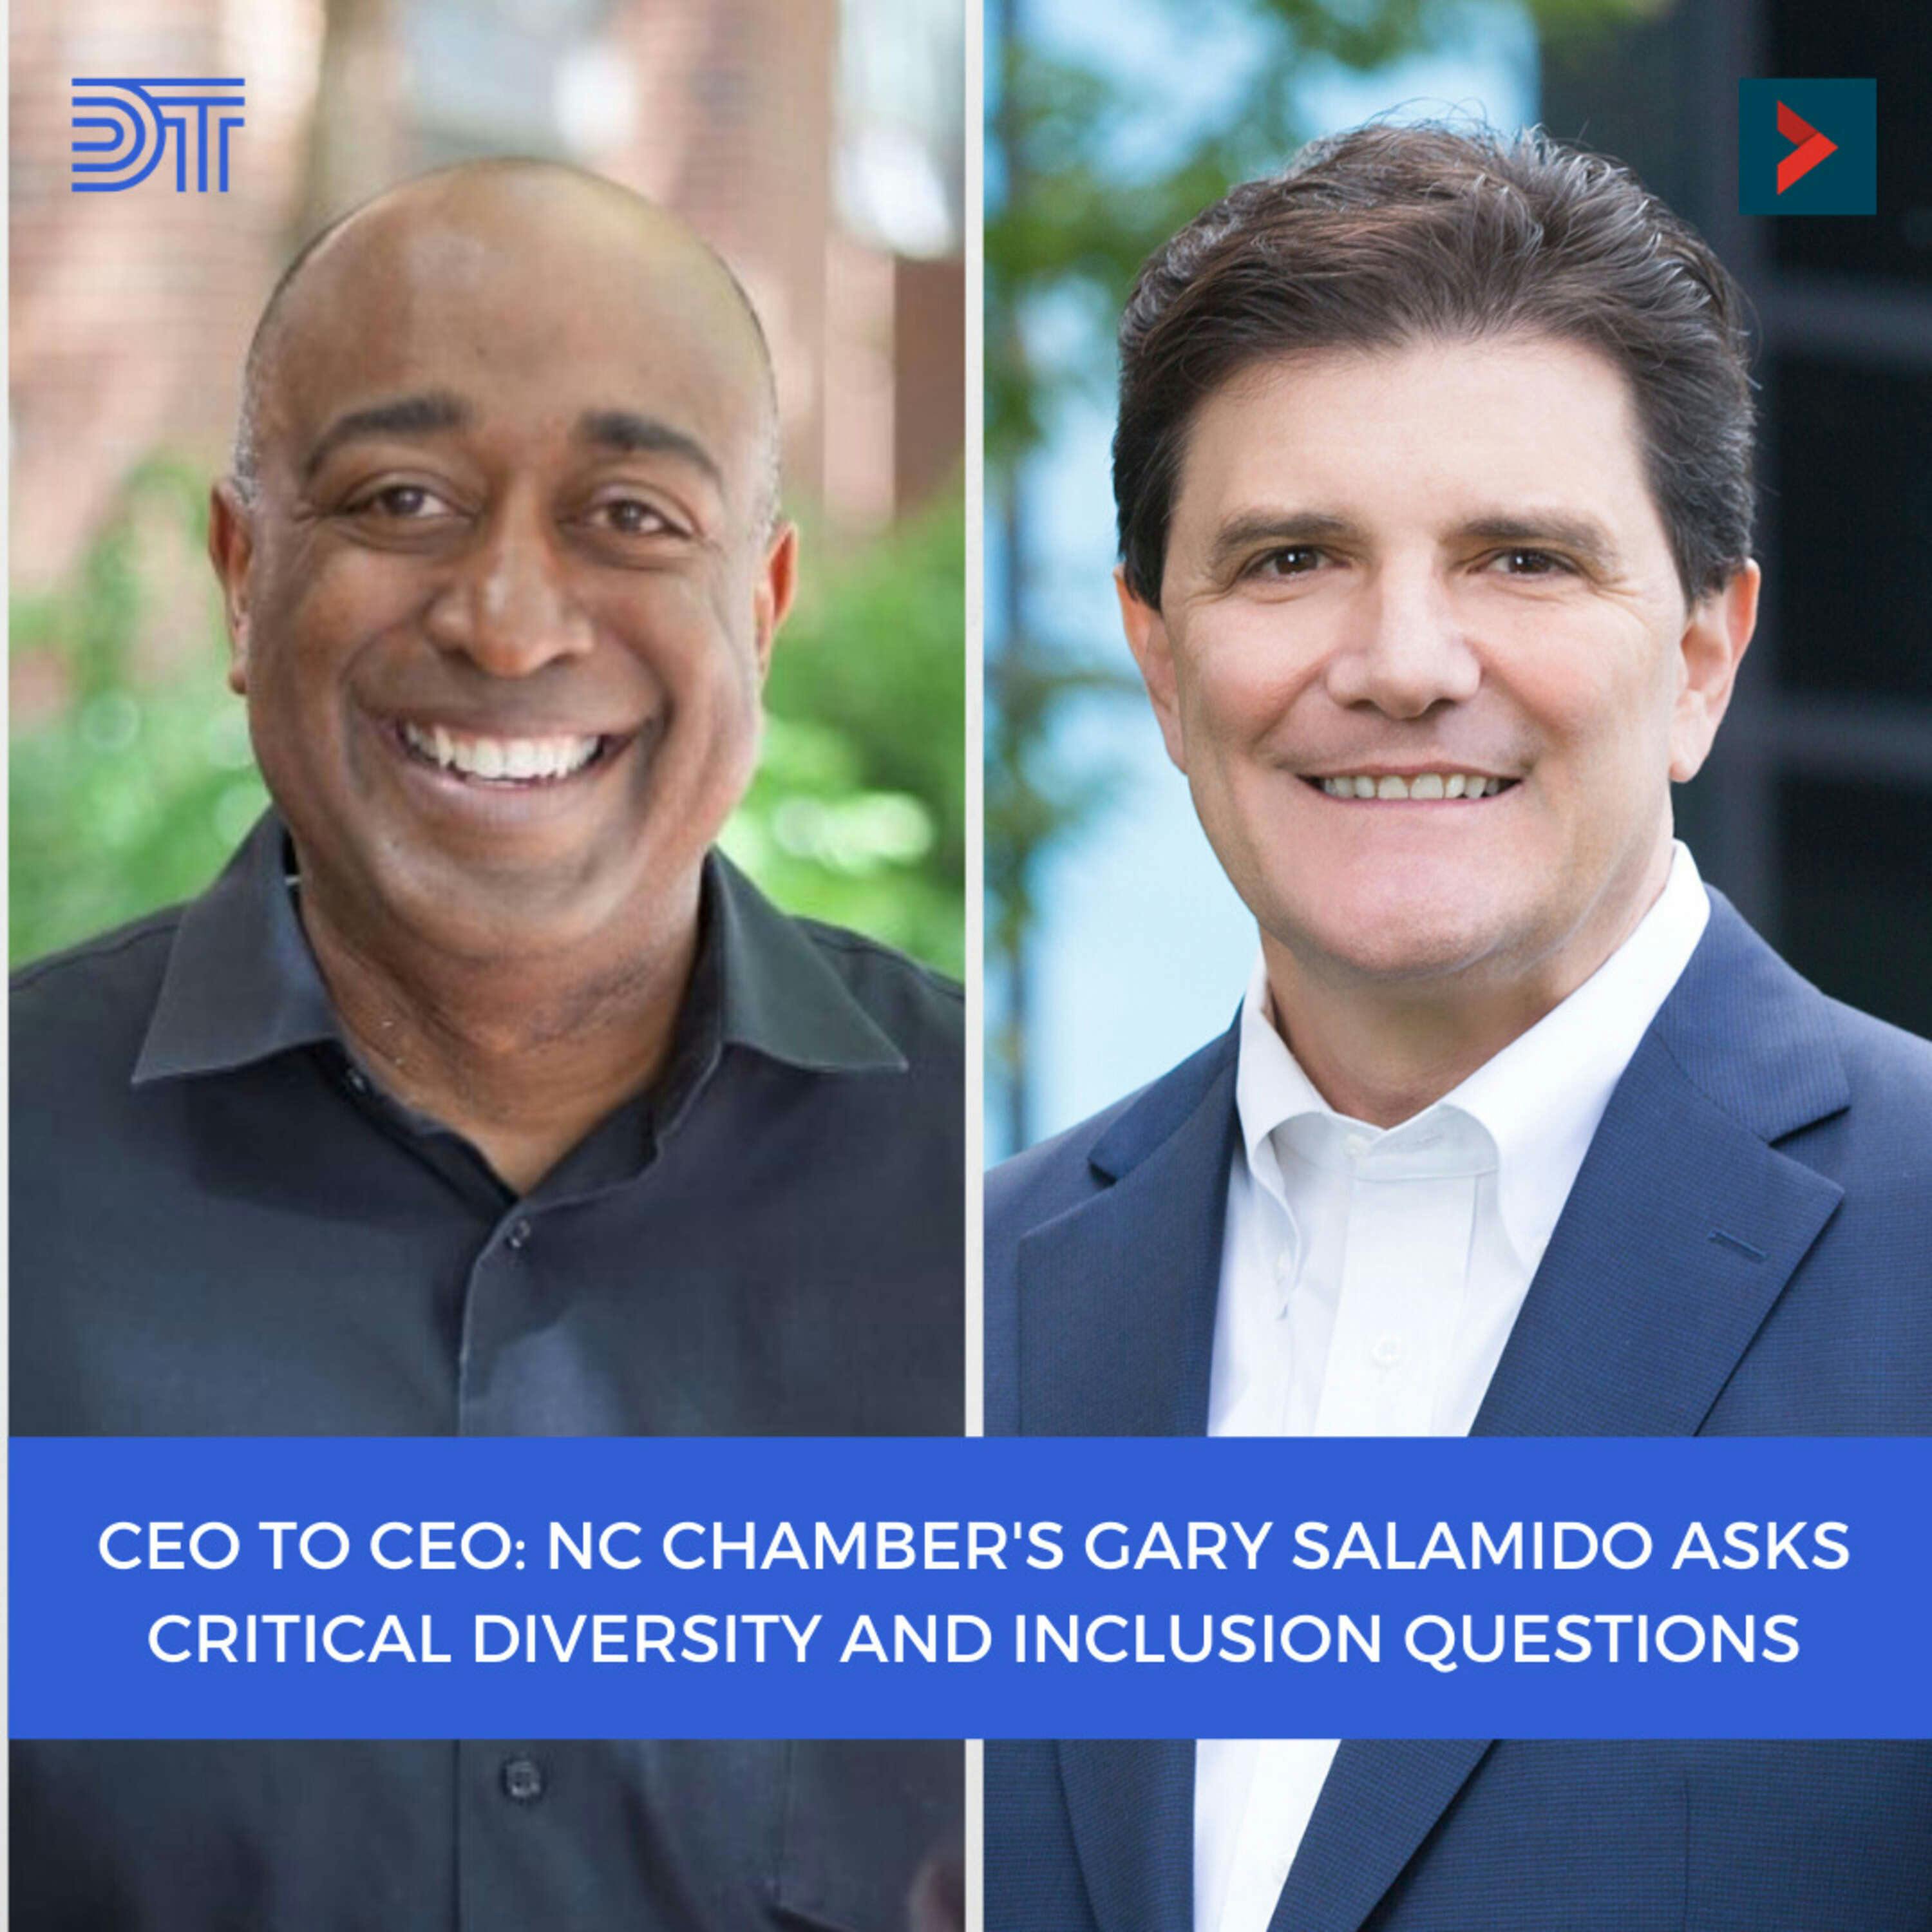 CEO to CEO: NC Chamber's Gary Salamido Asks Critical Diversity and Inclusion Questions